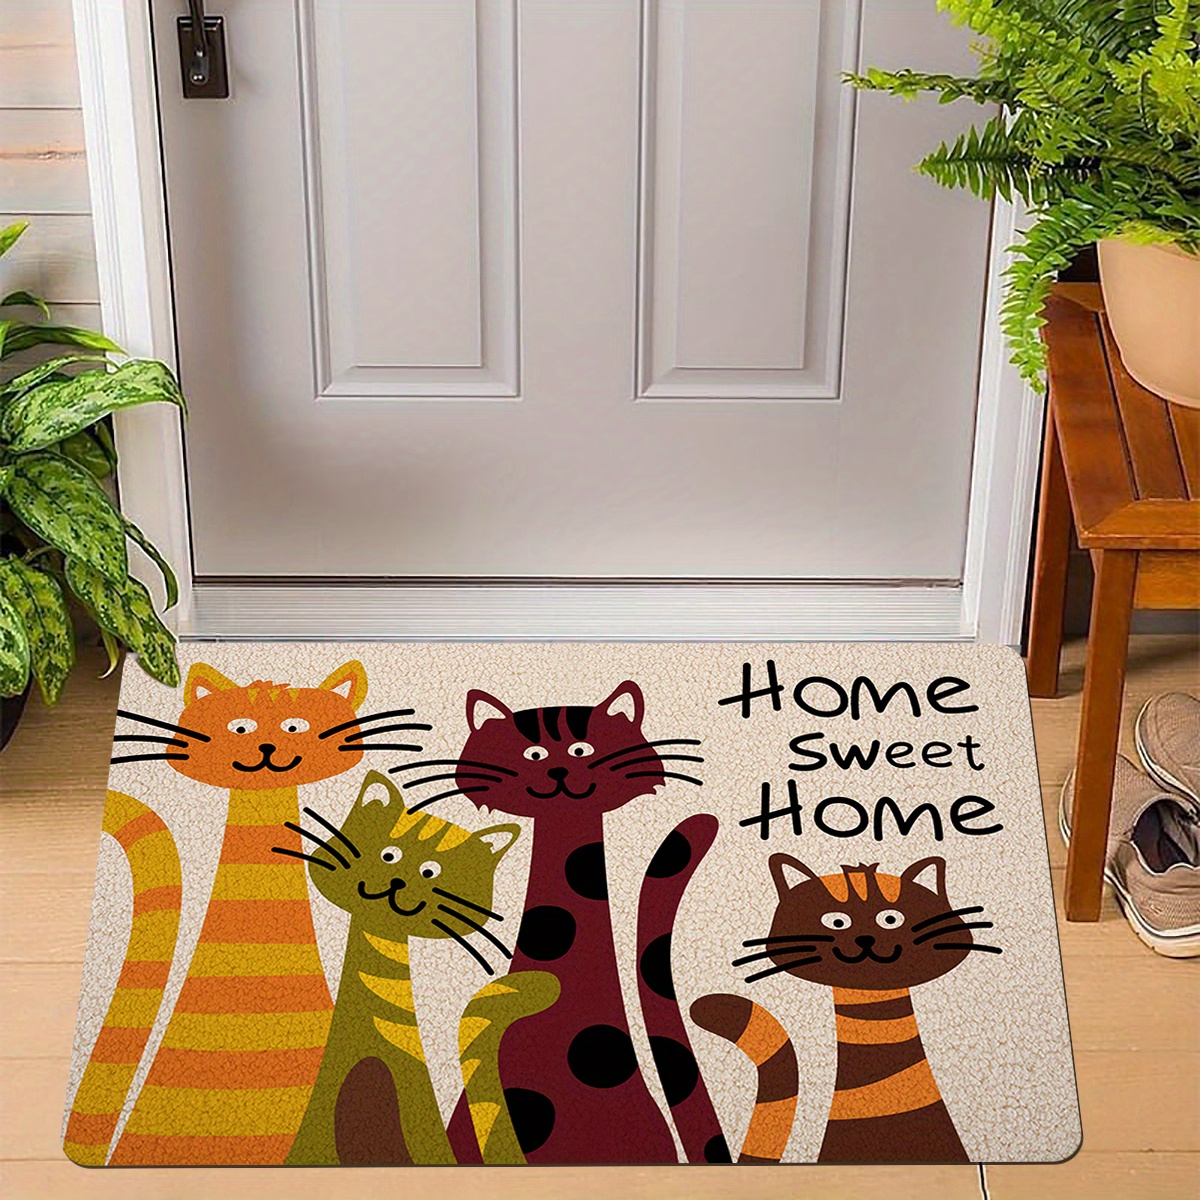 

Welcome Home Colorful Cat Alphabet Entrance Rug - Non-slip, Stain Resistant Polyester Mat With Soft Sponge Backing For Indoor/outdoor Use Cat Rug